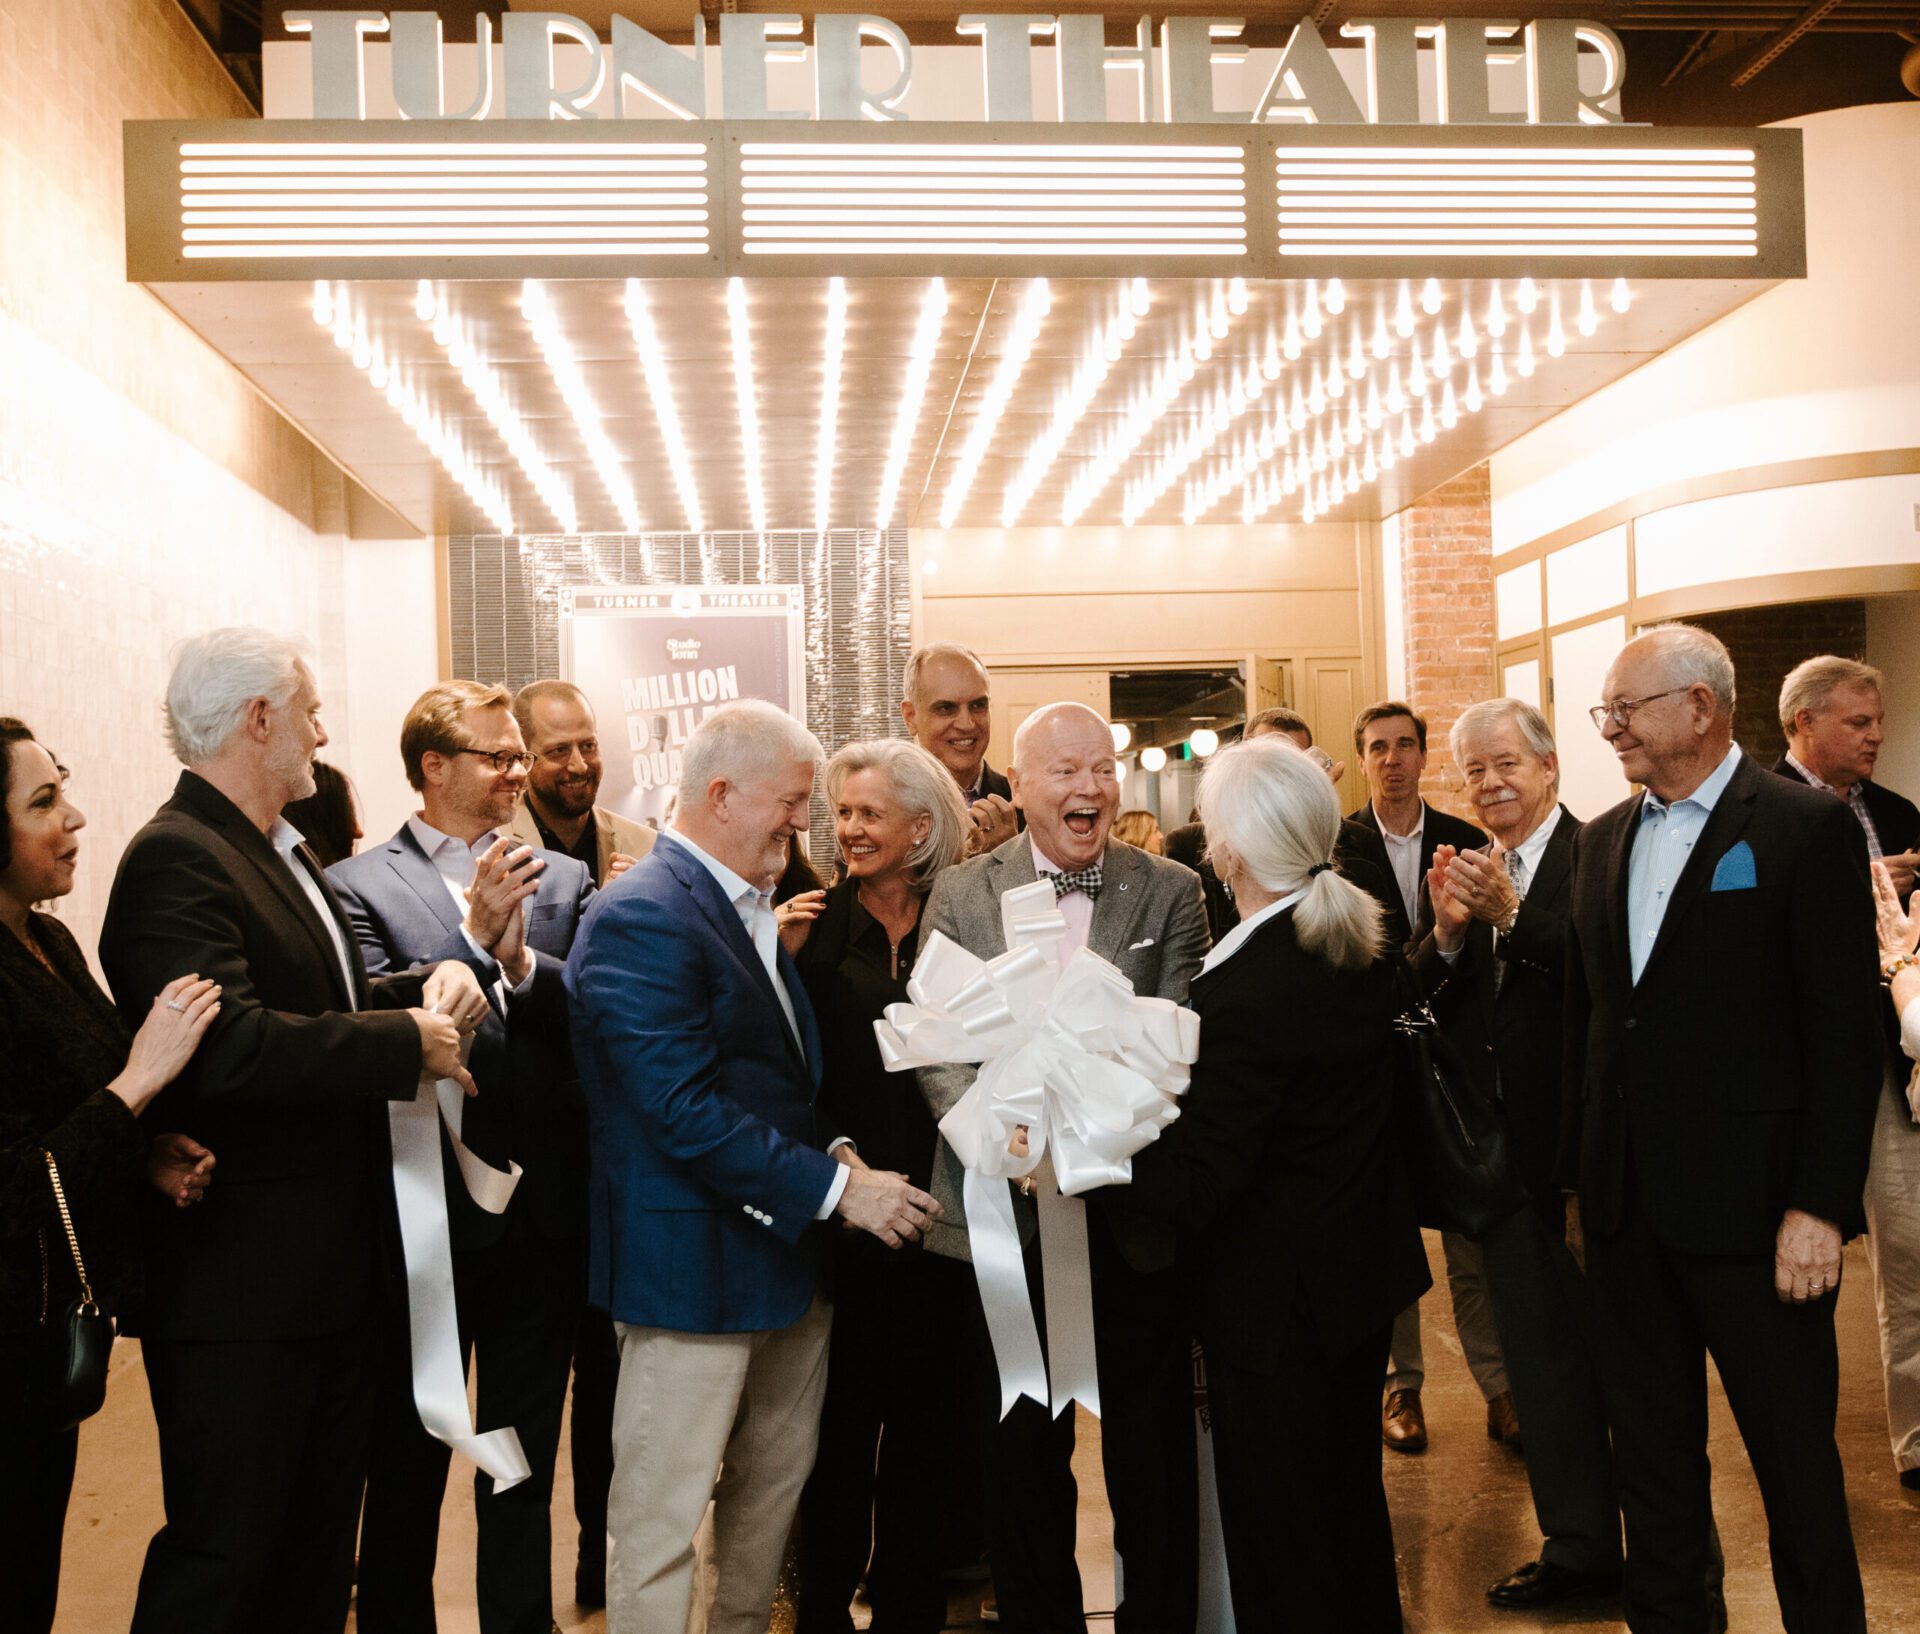 Cal Turner, namesake of Turner Theater, cuts the ribbon to officially open Studio Tenn's permanent home.